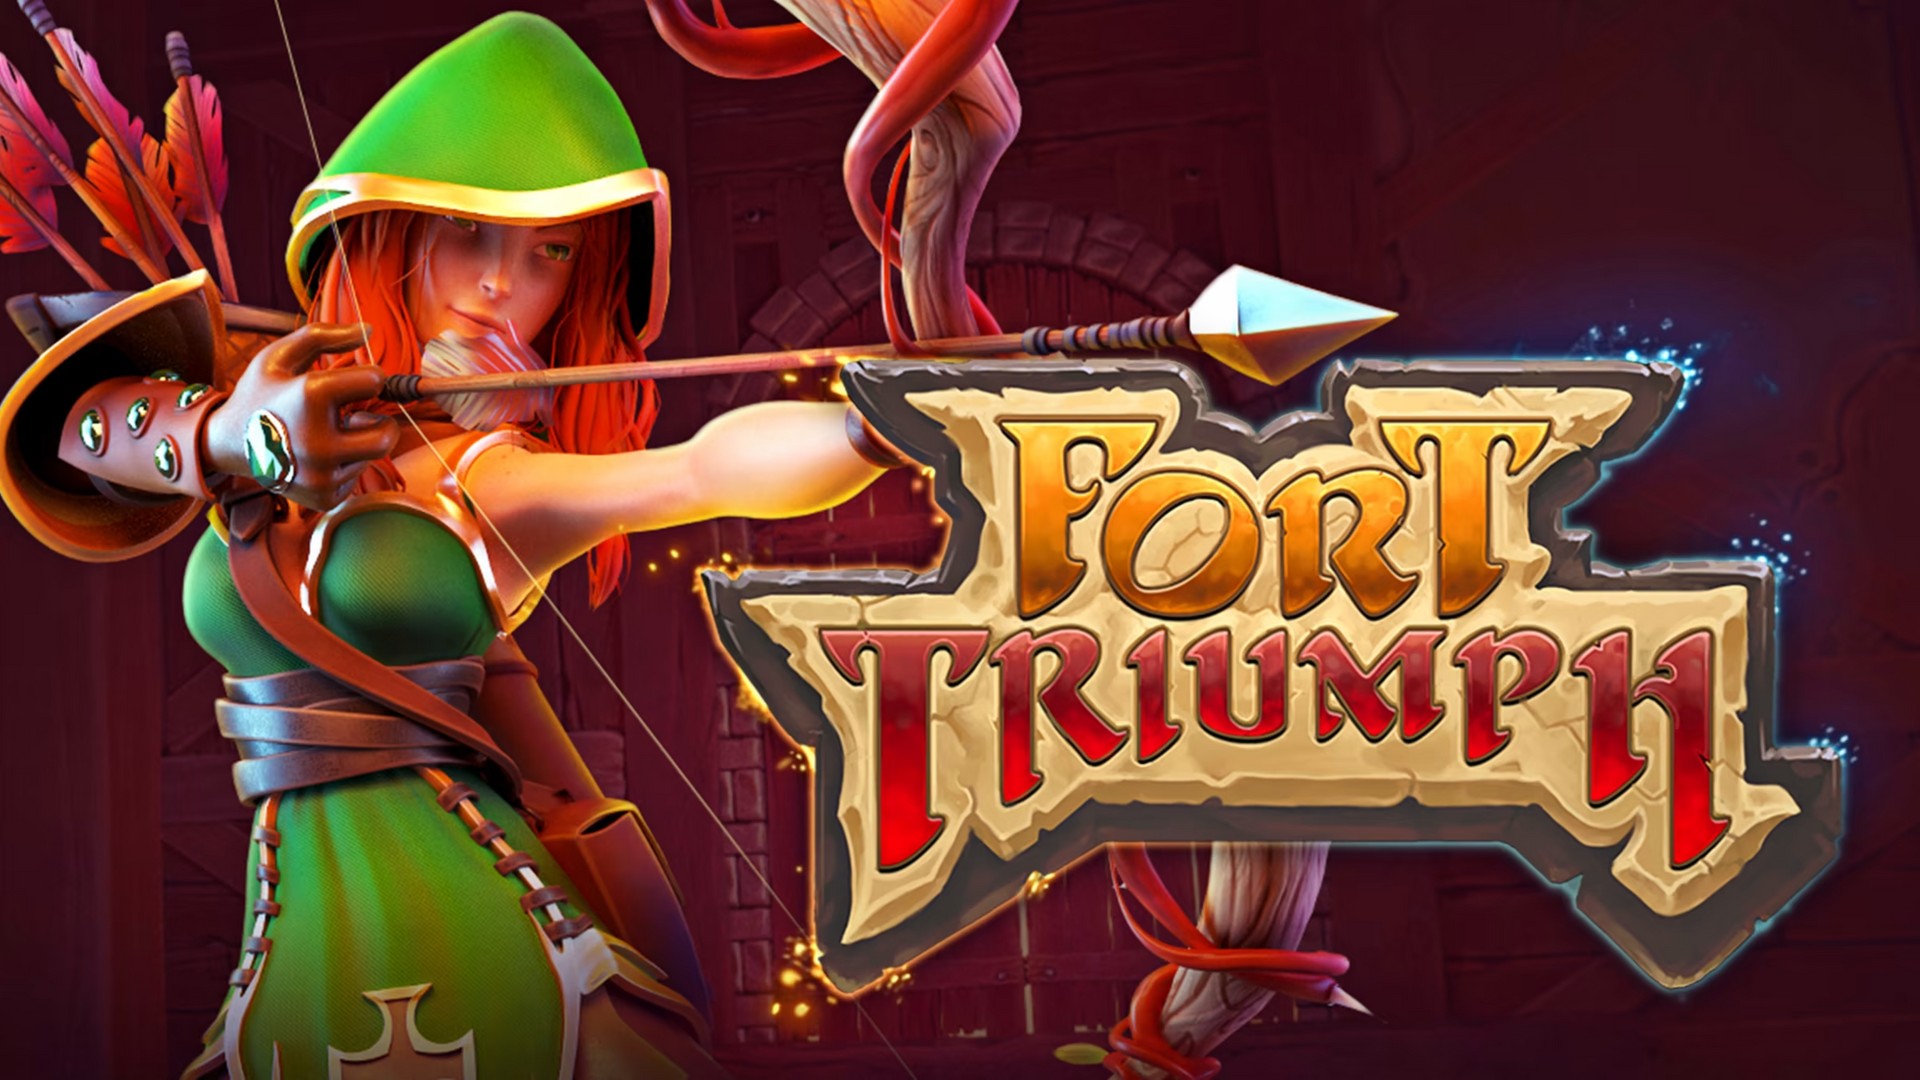  Free game alert!  Fort Triumph and RPG in a Box on the Epic Games Store
